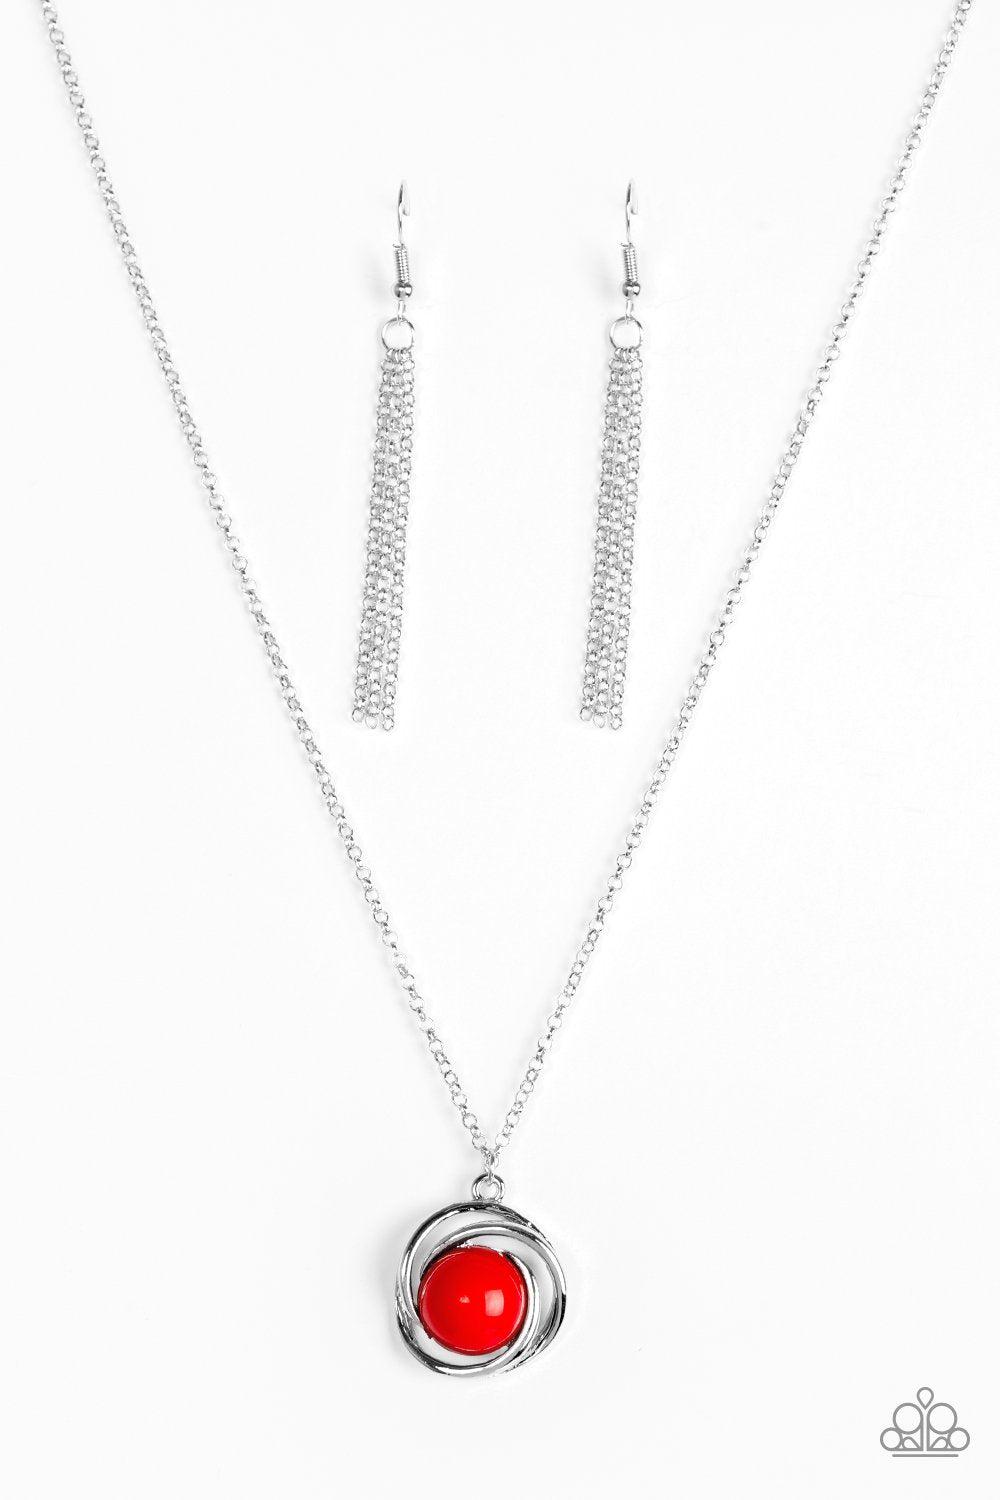 Ripple Effect Red and Silver Necklace - Paparazzi Accessories-CarasShop.com - $5 Jewelry by Cara Jewels